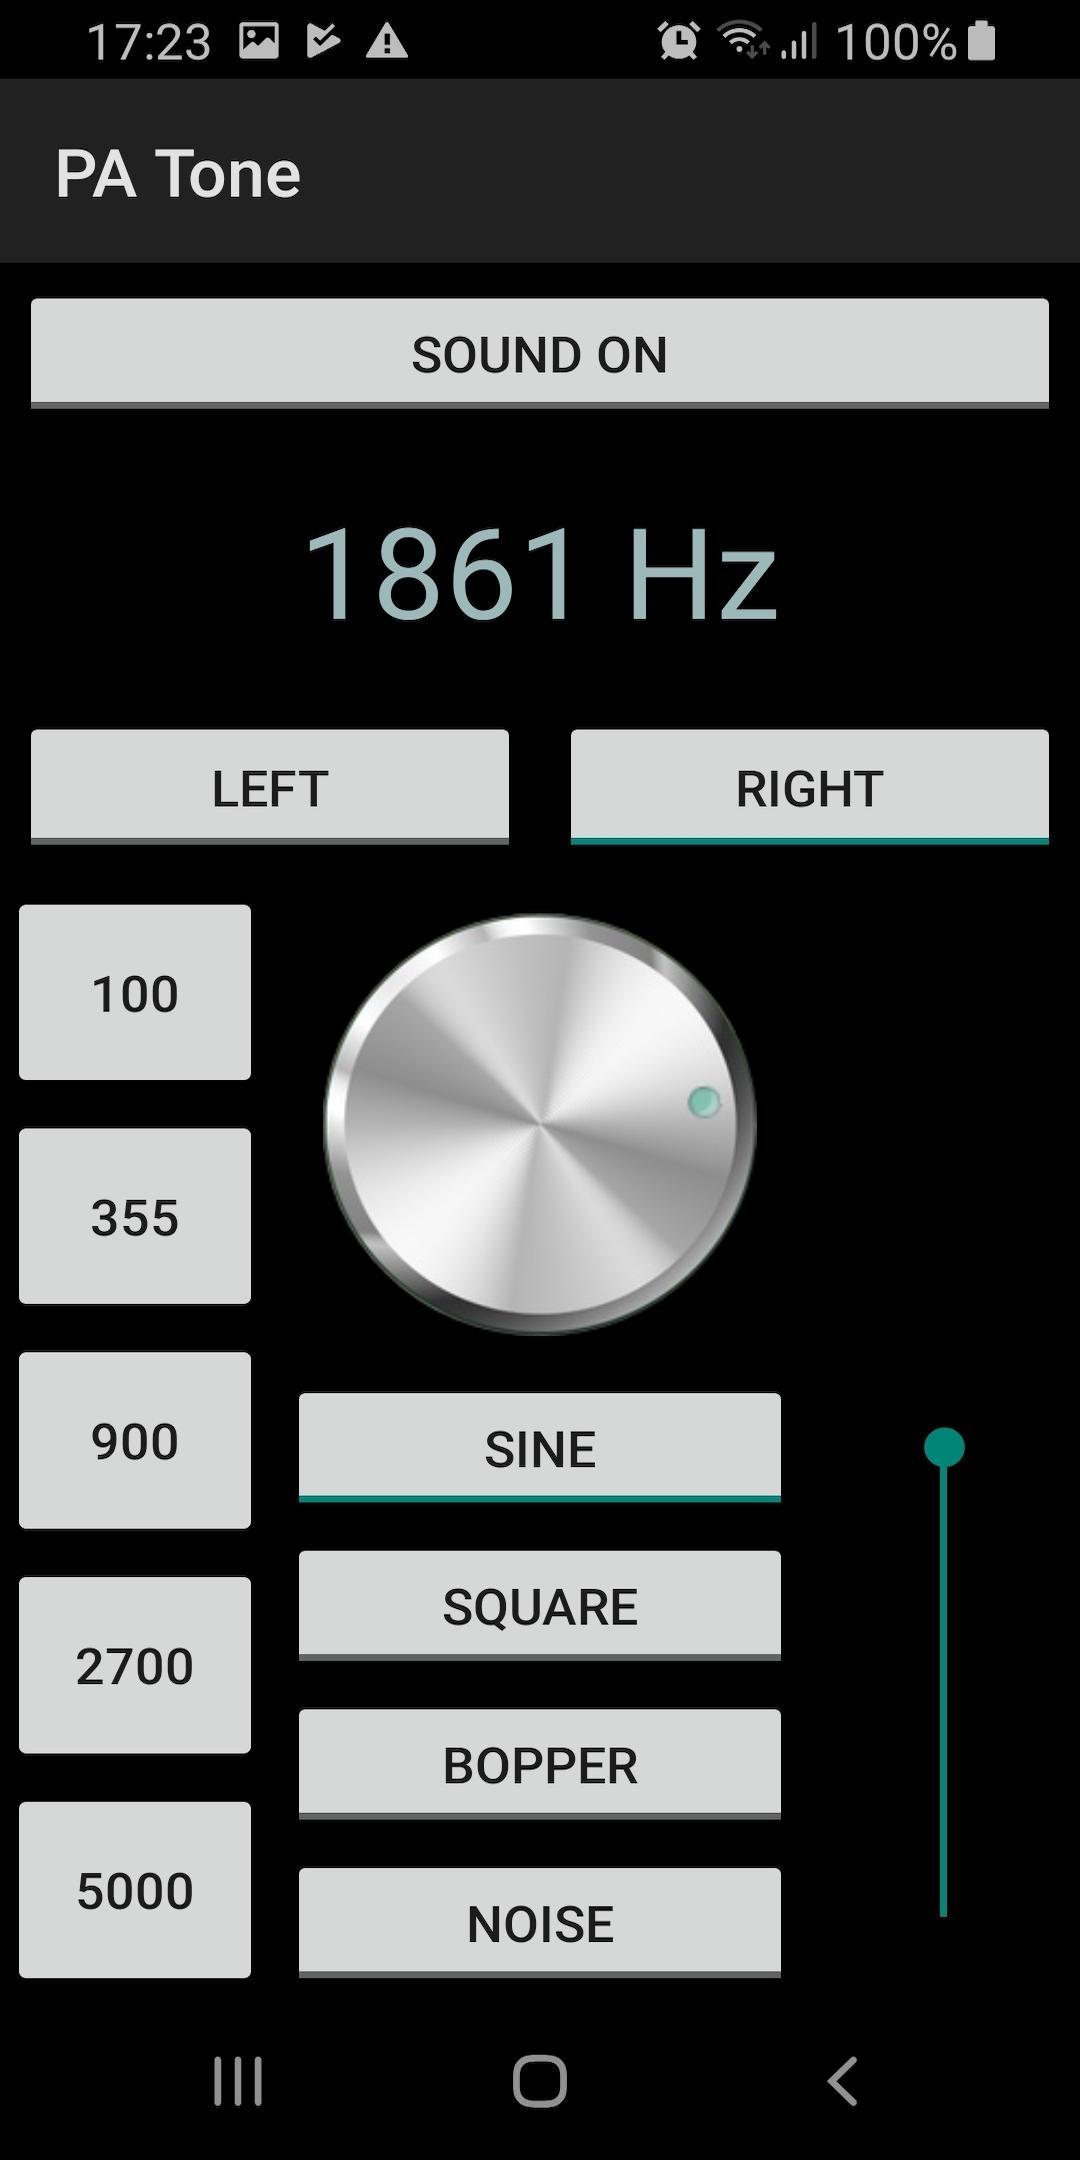 Pro Audio Tone Generator for Android - APK Download